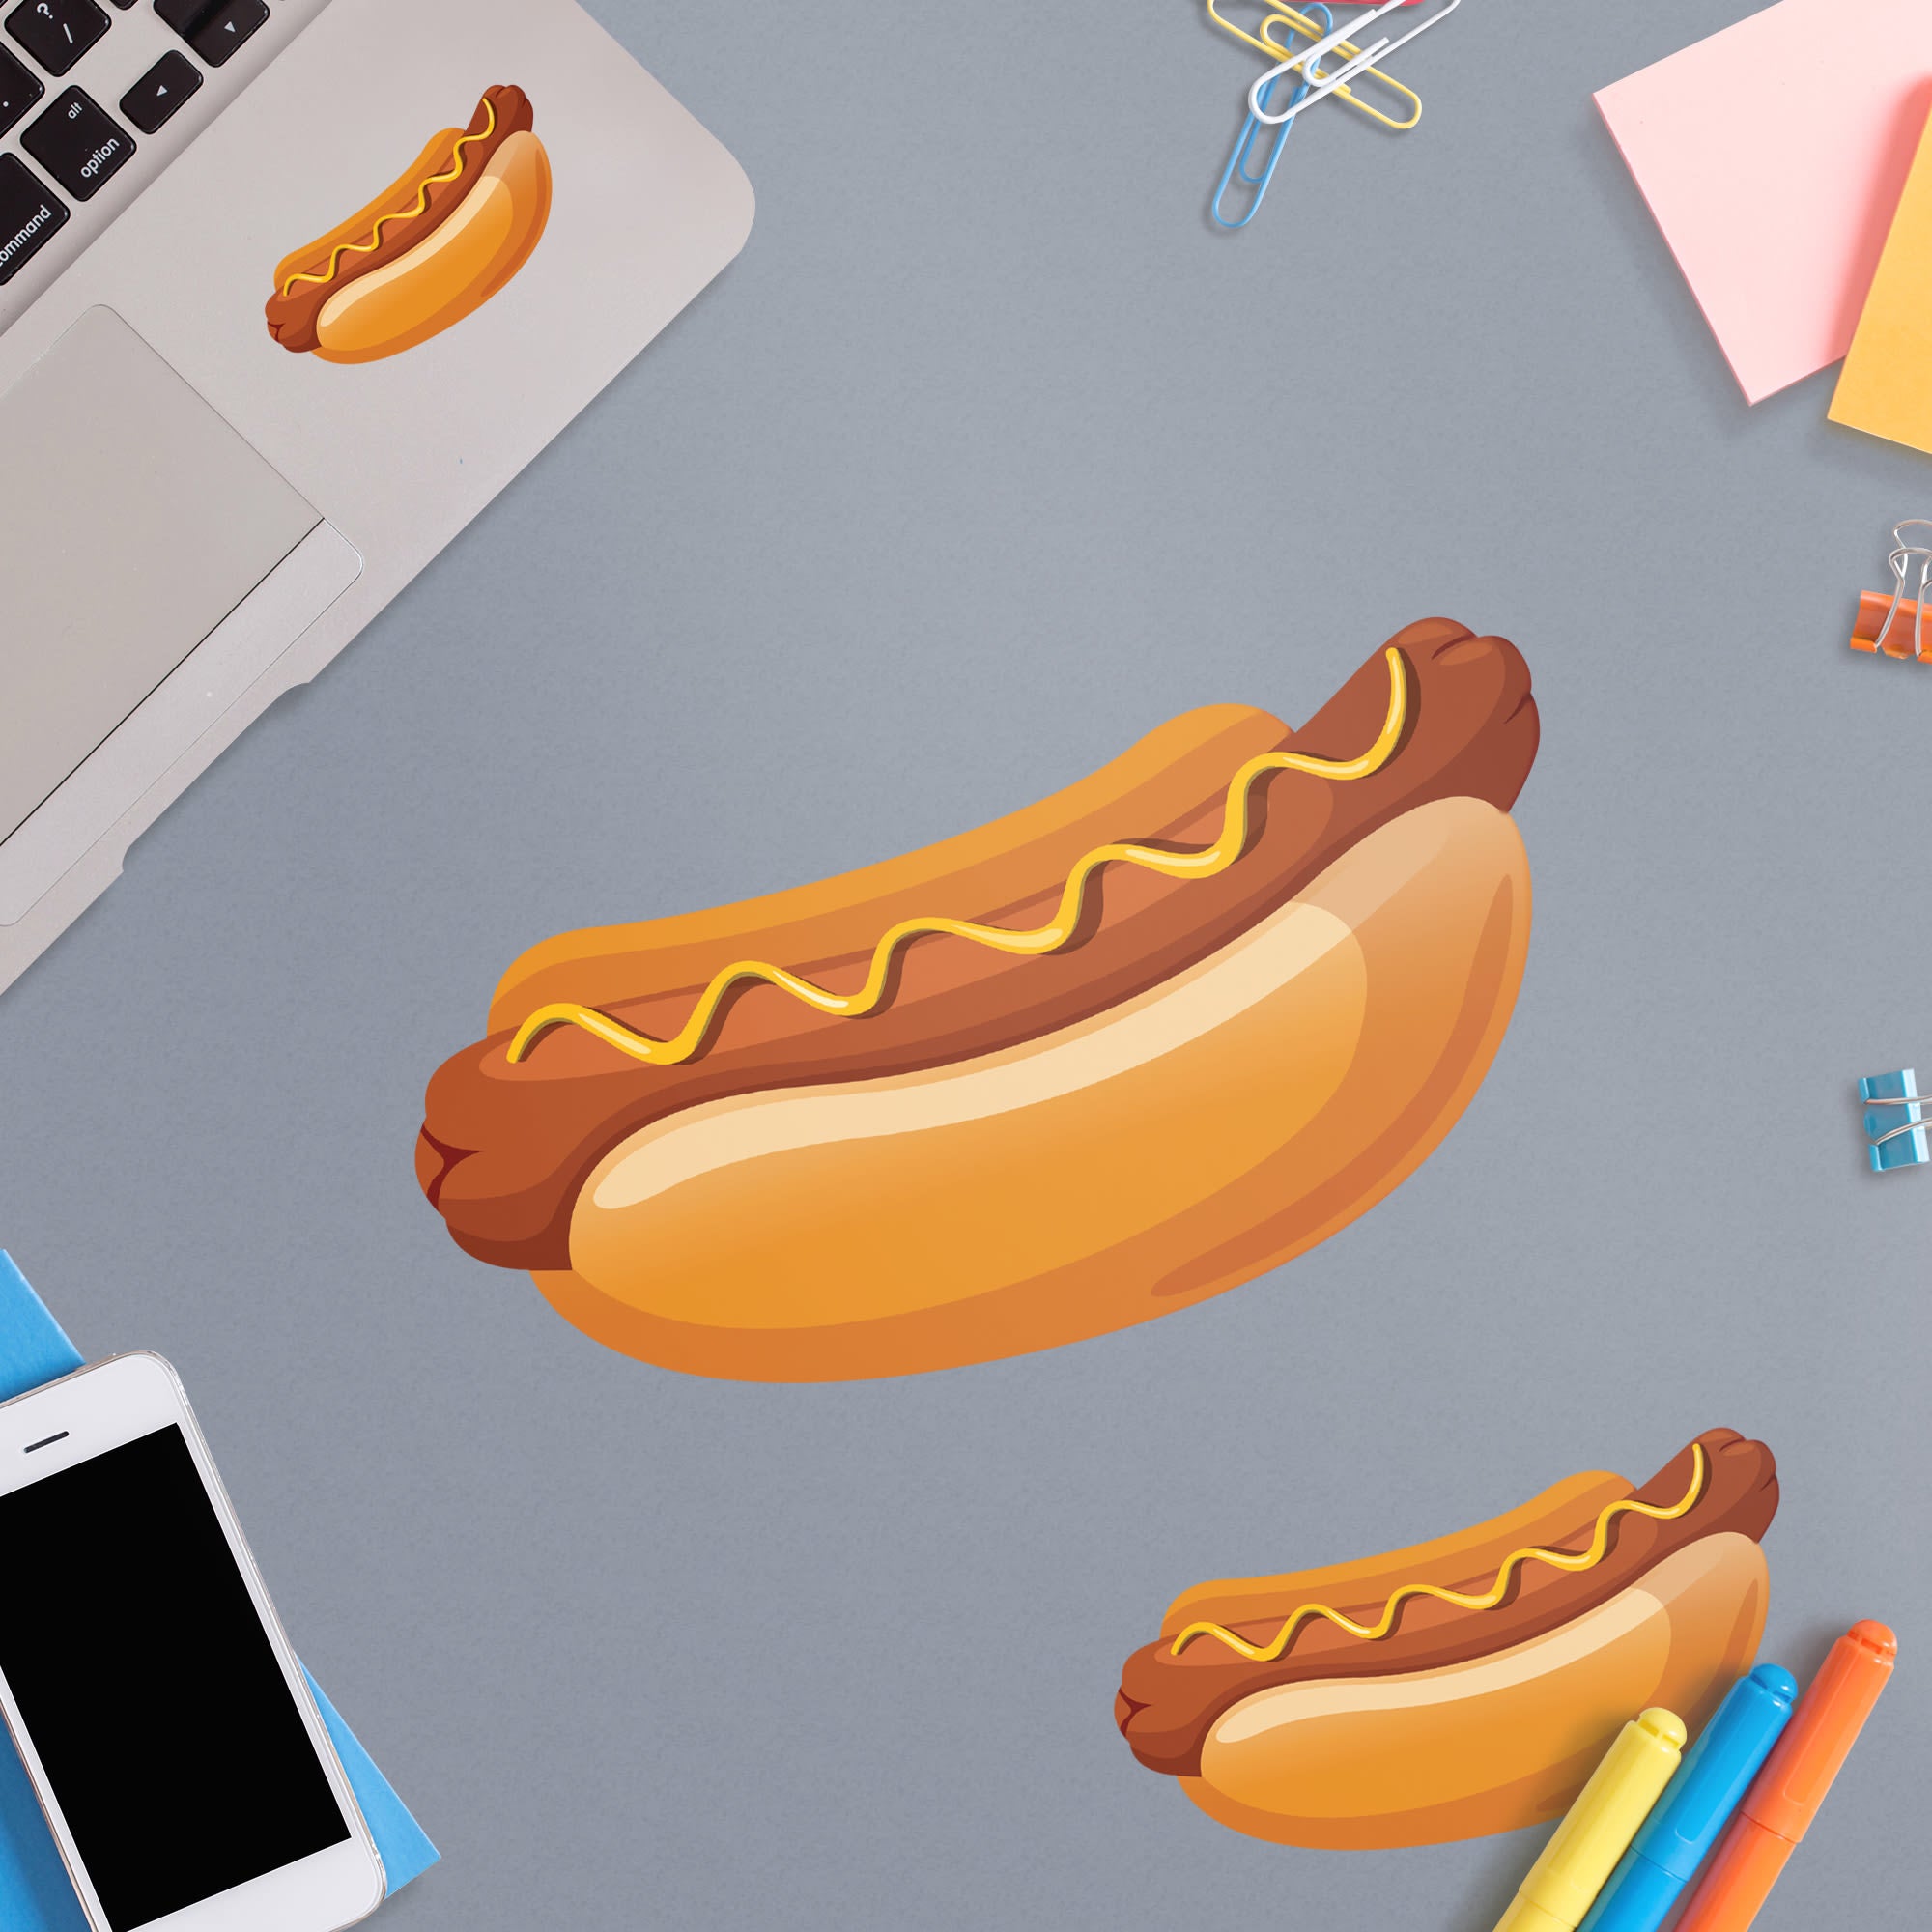 Hot Dog: Illustrated Collection - Removable Vinyl Decals 8.0"W x 10.0"H by Fathead